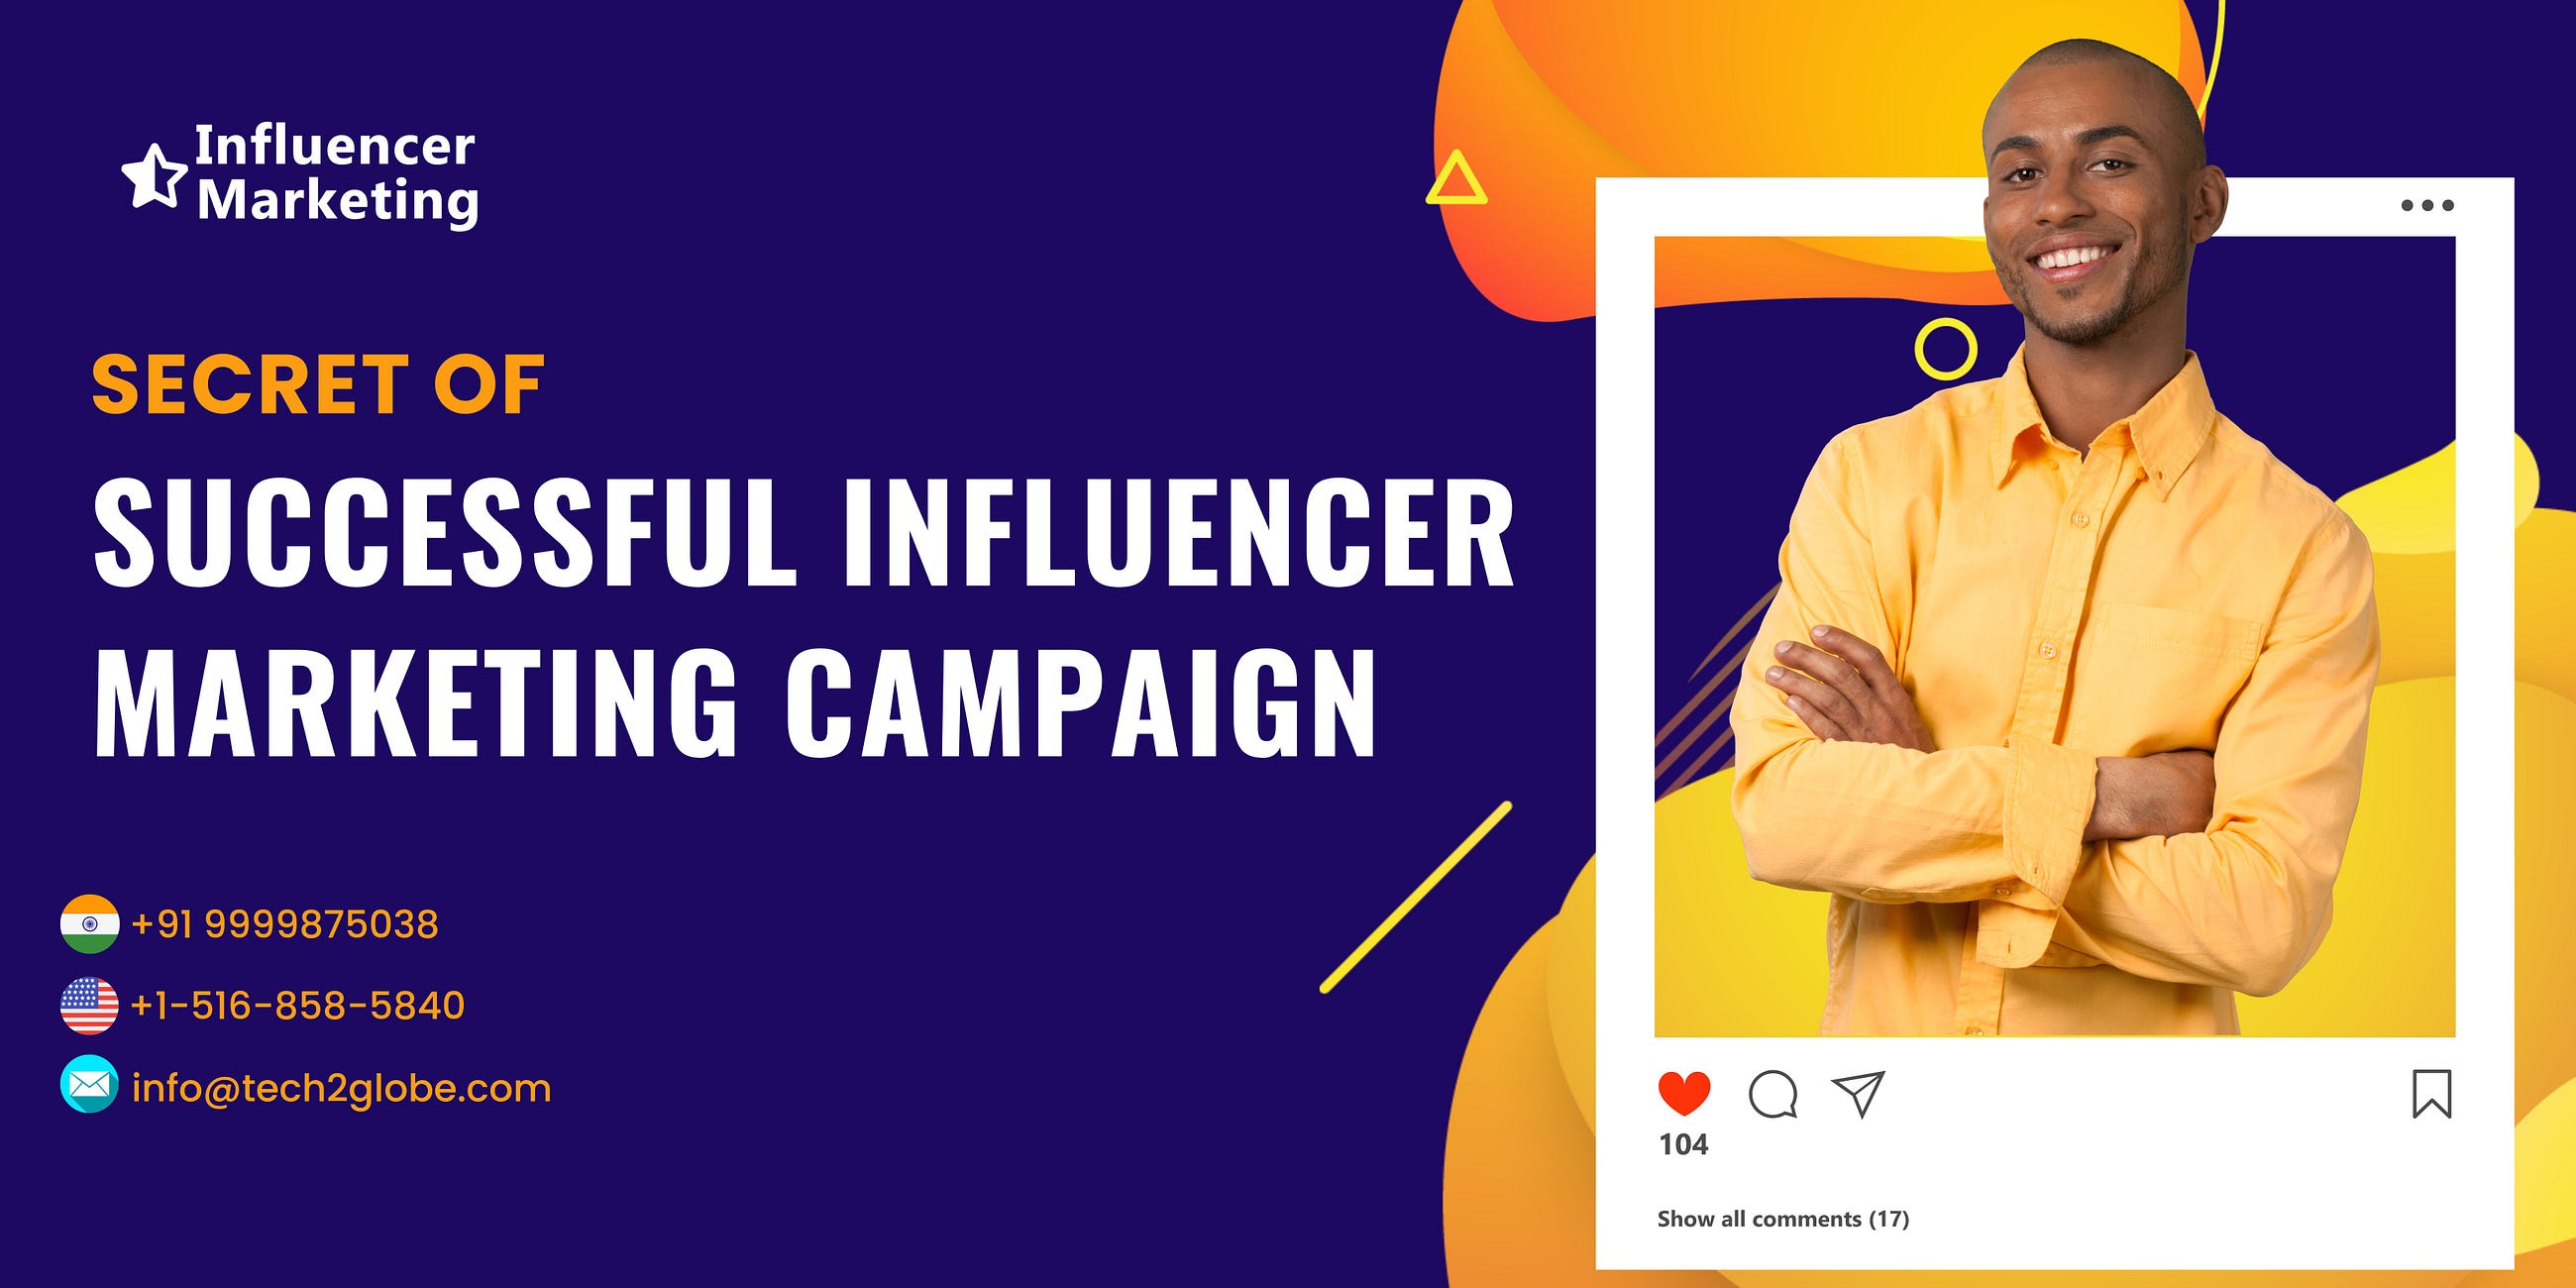 Influencer Marketing India: The Secret Of Successful Influencer Marketing Campaigns